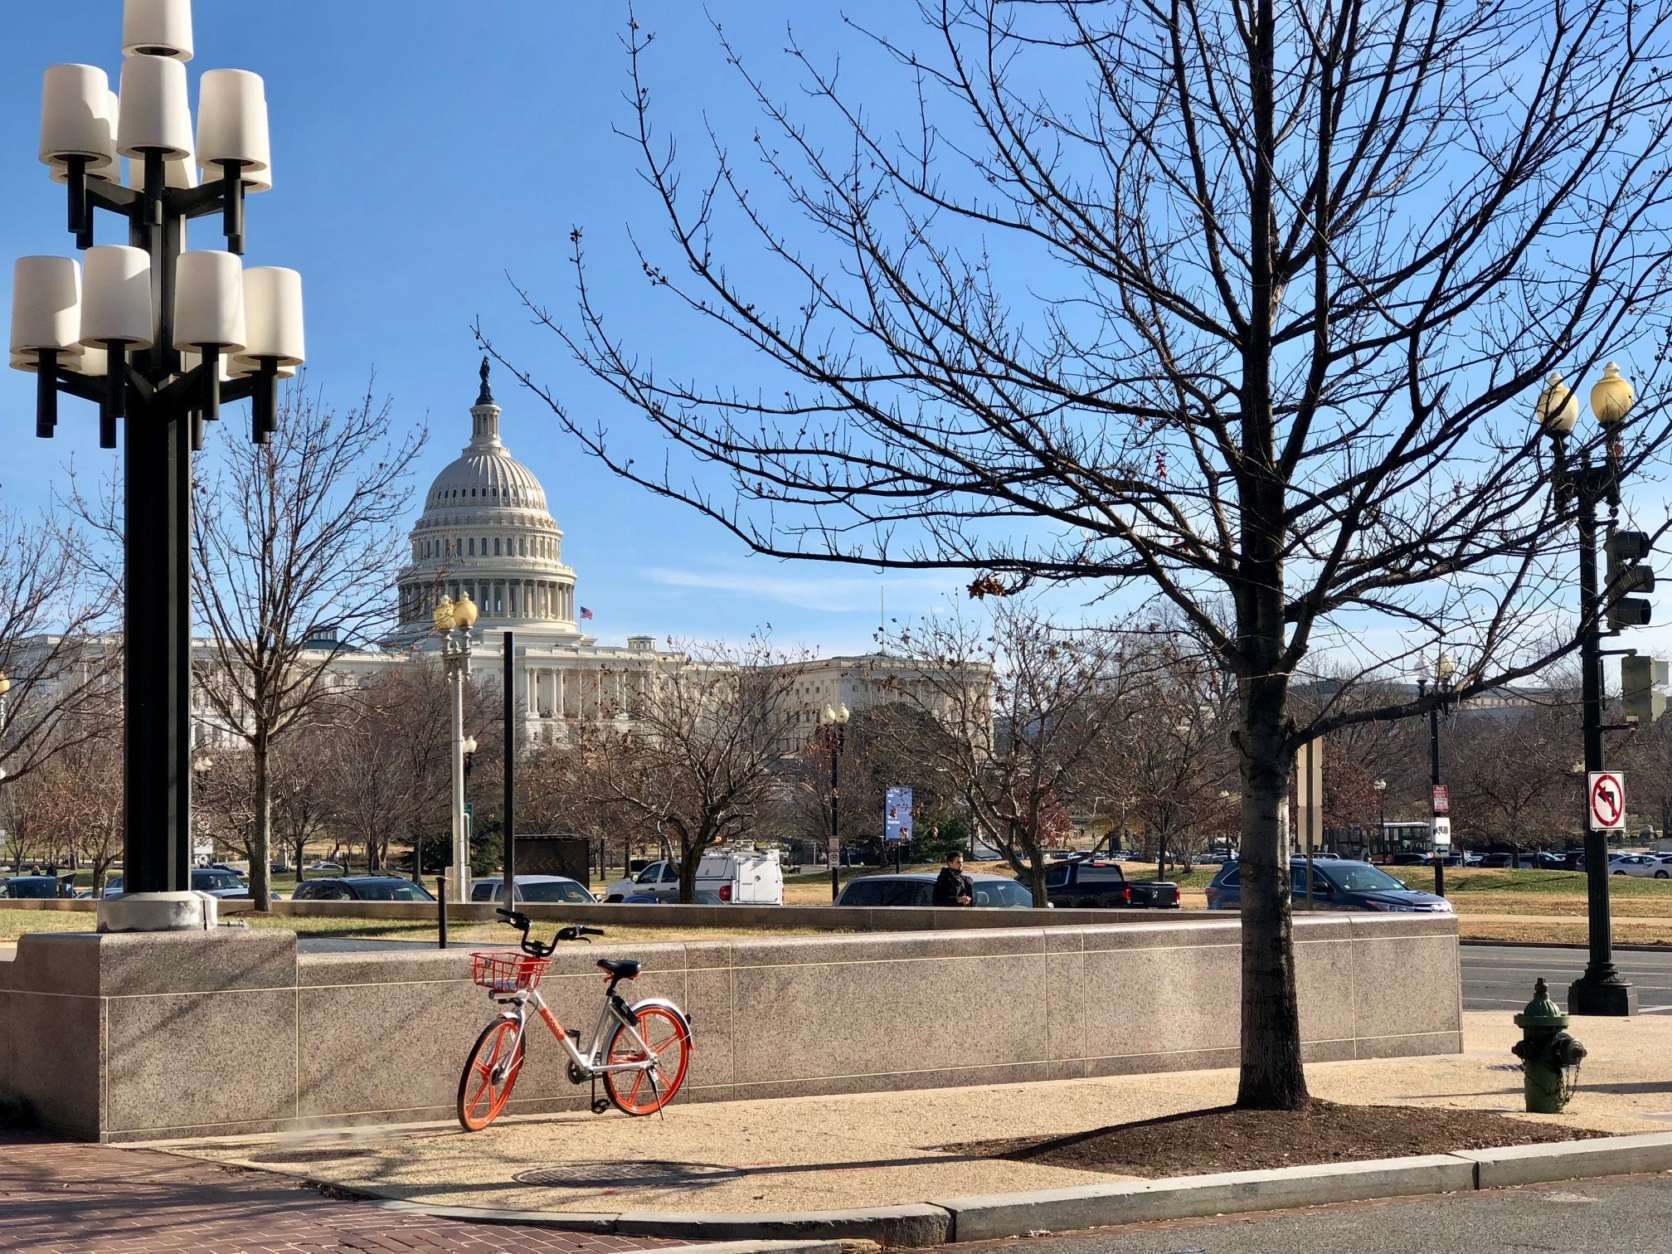 D.C. has entered into partnership with dockless bike services including LimeBike, Ofo, Mobike, Jump Bikes and Spin. (WTOP/Megan Cloherty)